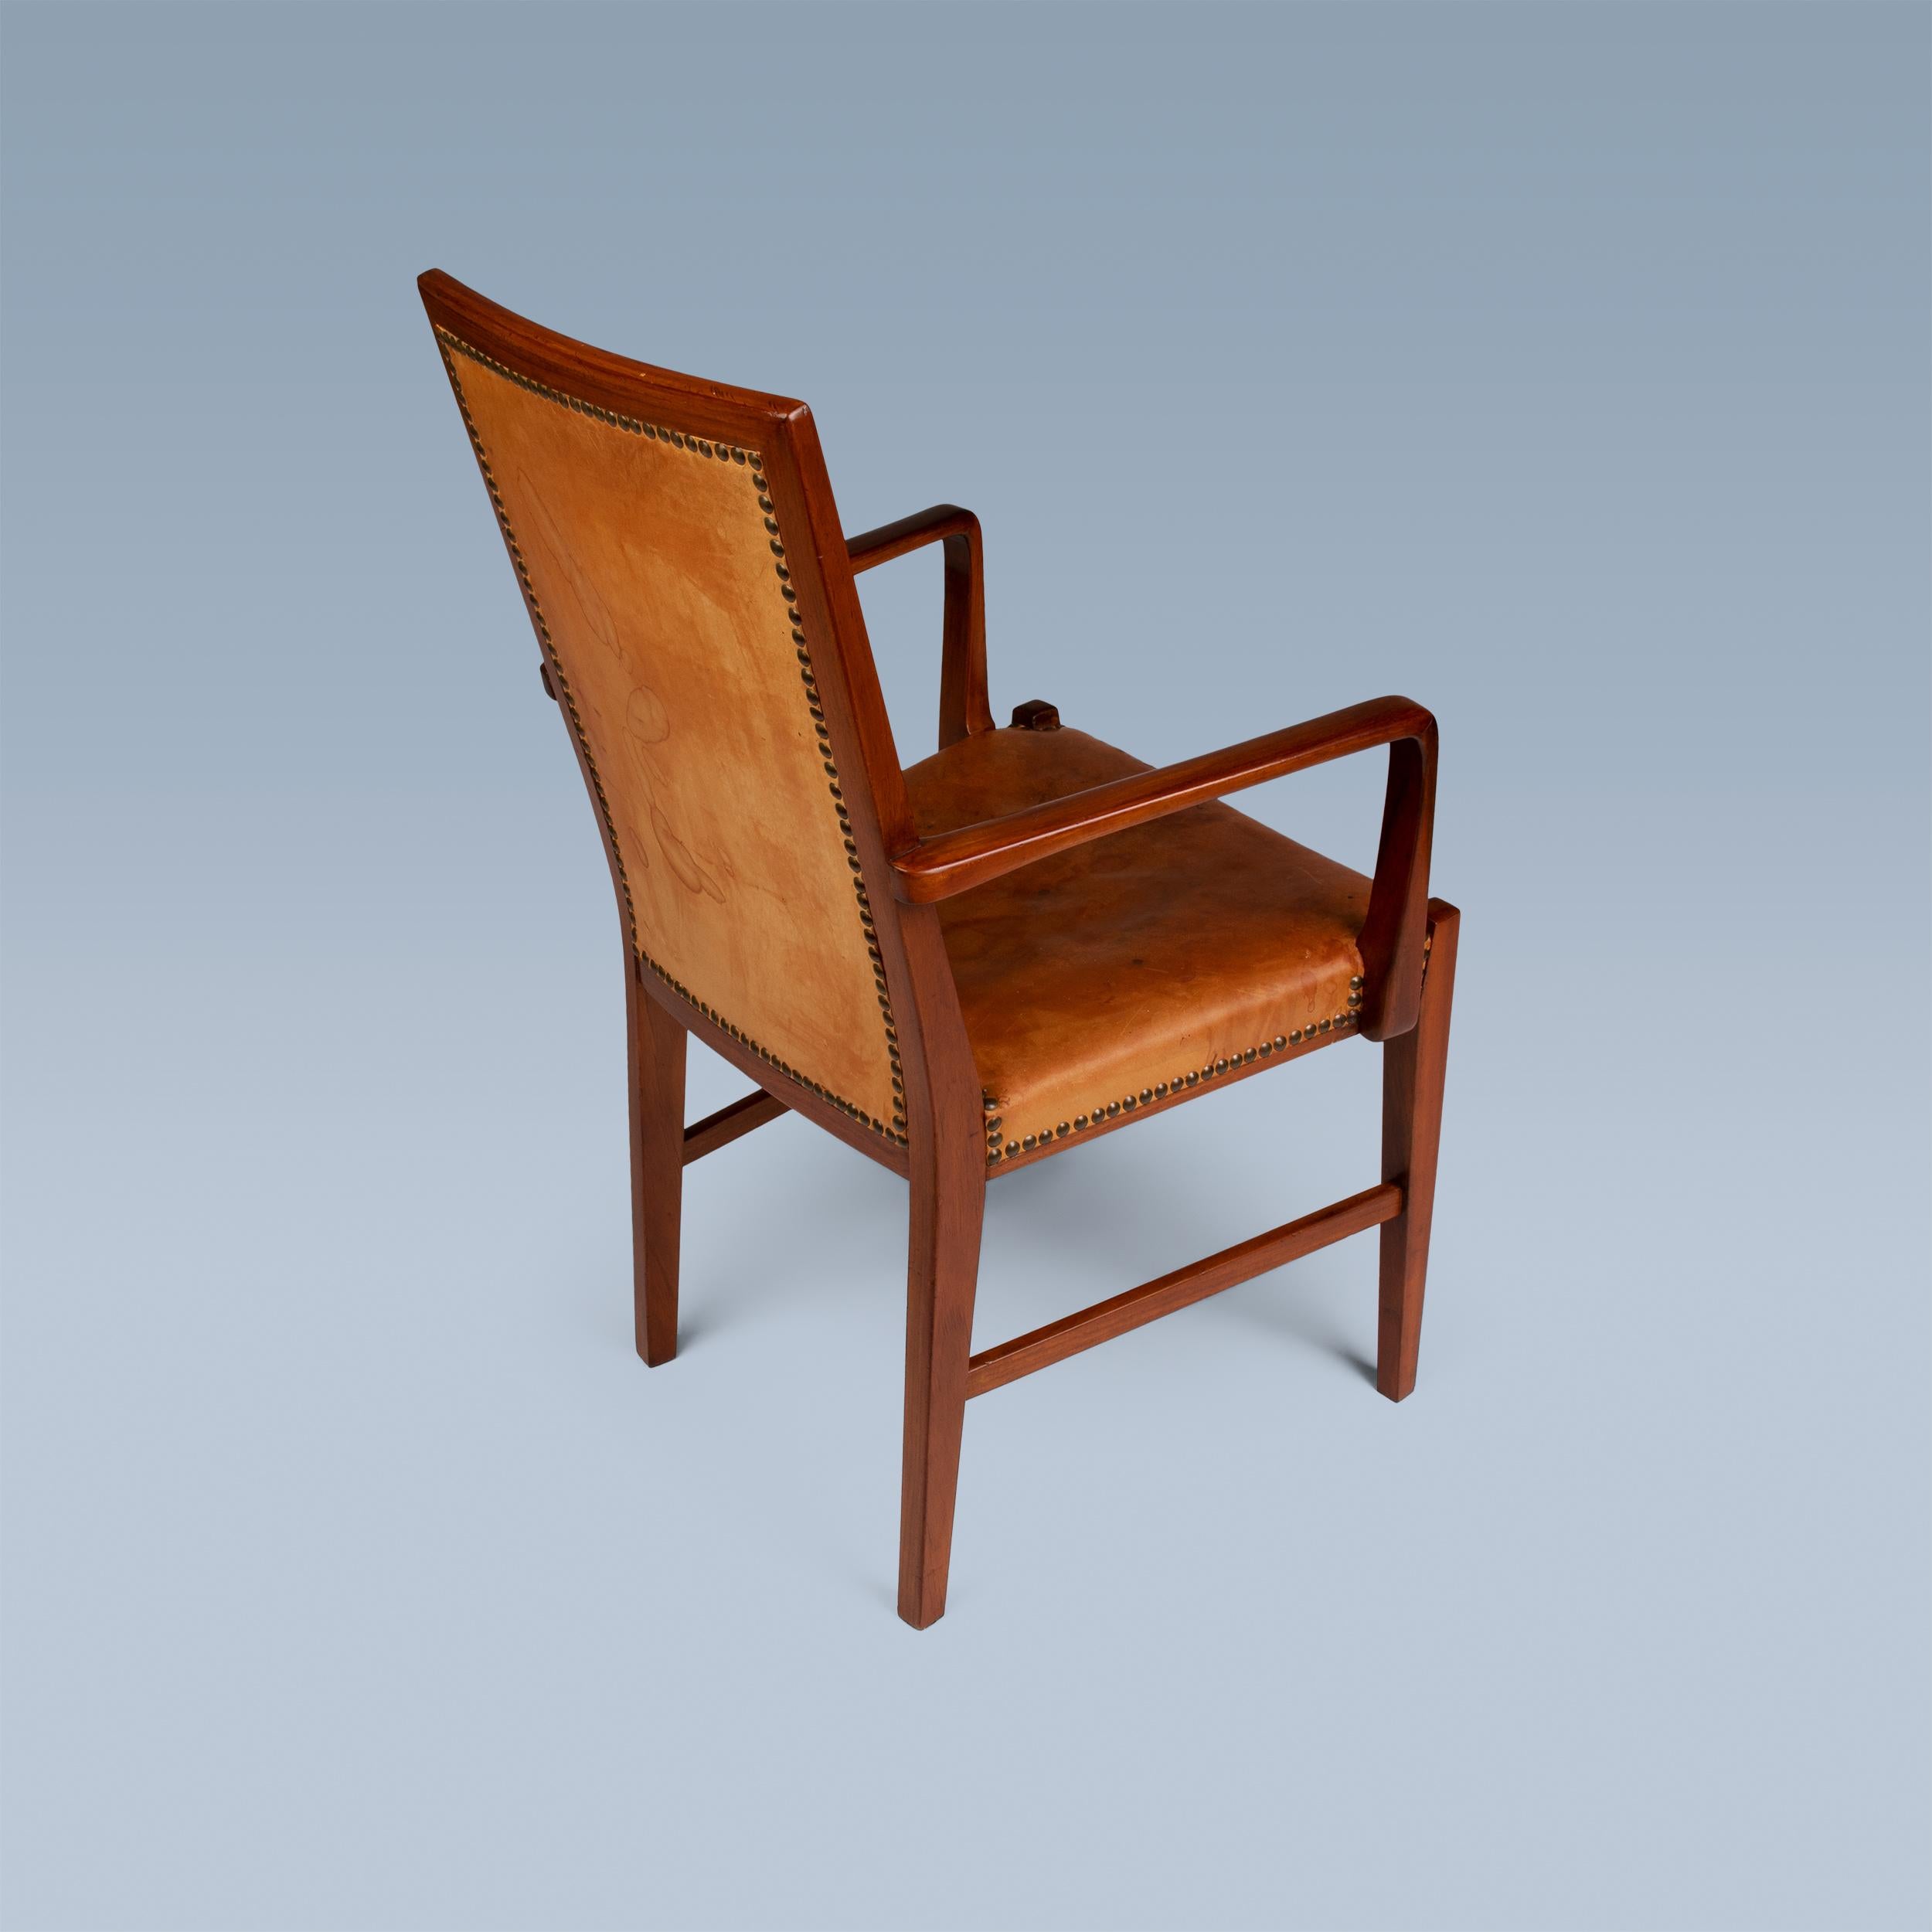 Brass High back nut wood armchair with leather seat and back by Danish cabinetmaker For Sale